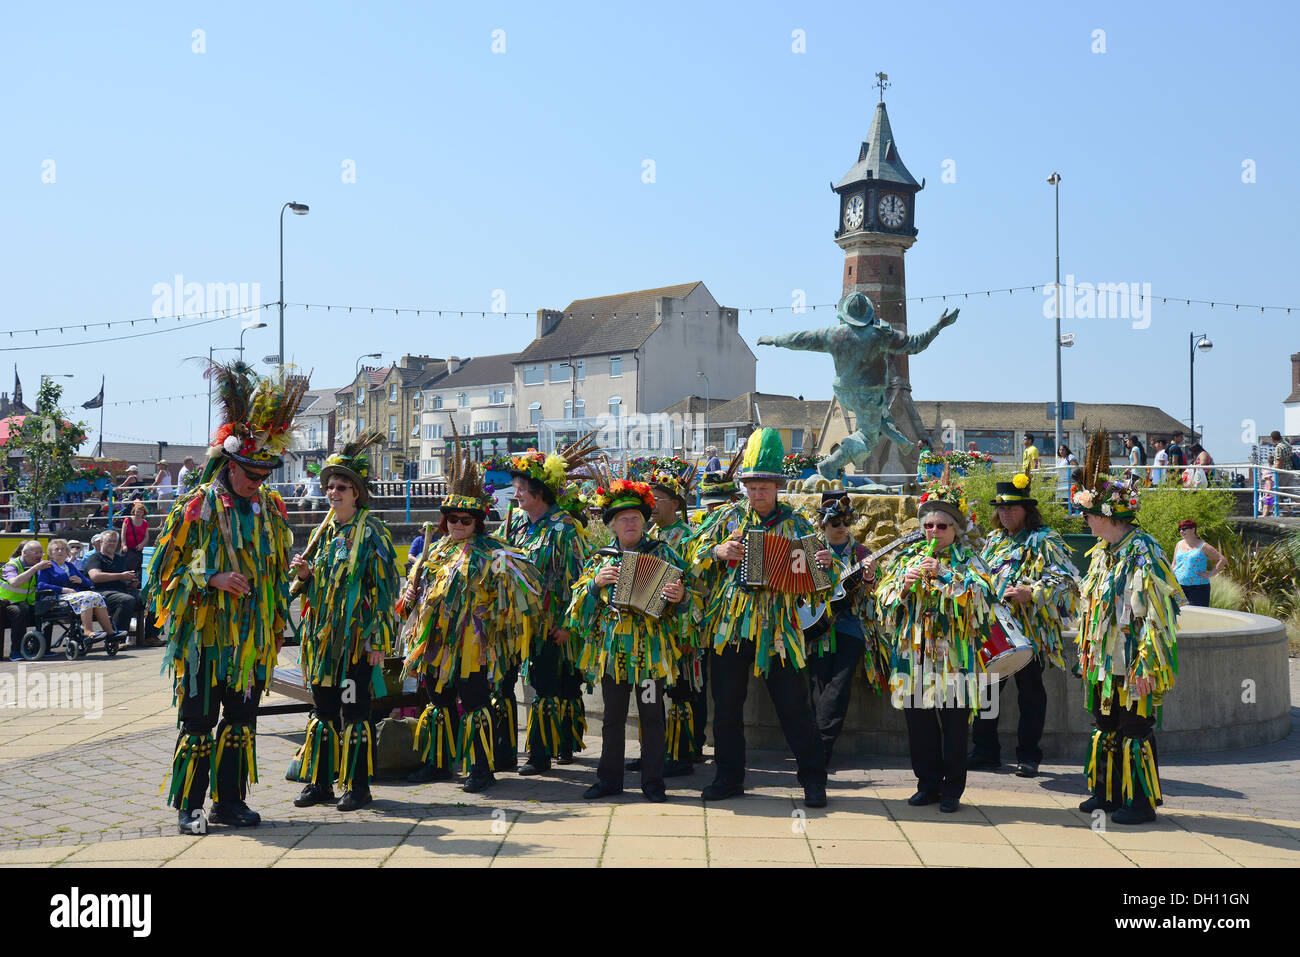 Morris dancing troupe performing on seafront promenade, Skegness, Lincolnshire, England, United Kingdom Stock Photo